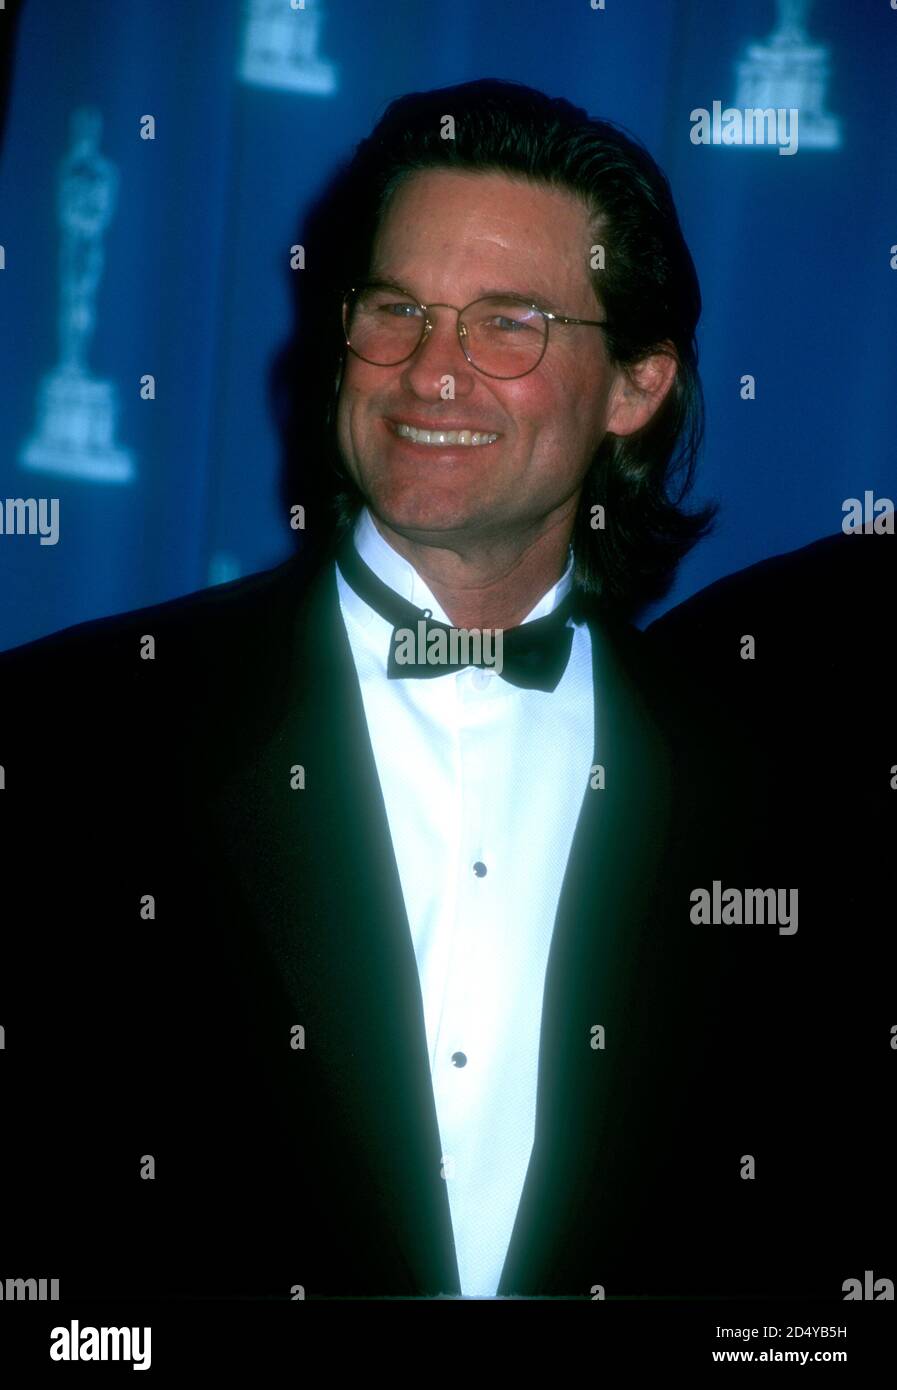 Los Angeles, California, USA 25th March 1996 Actor Kurt Russell attends the 68th Annual Academy Awards at Dorothy Chandler Pavilioin on March 25, 1996 in Los Angeles, California, USA. Photo by Barry King/Alamy Stock Photo Stock Photo